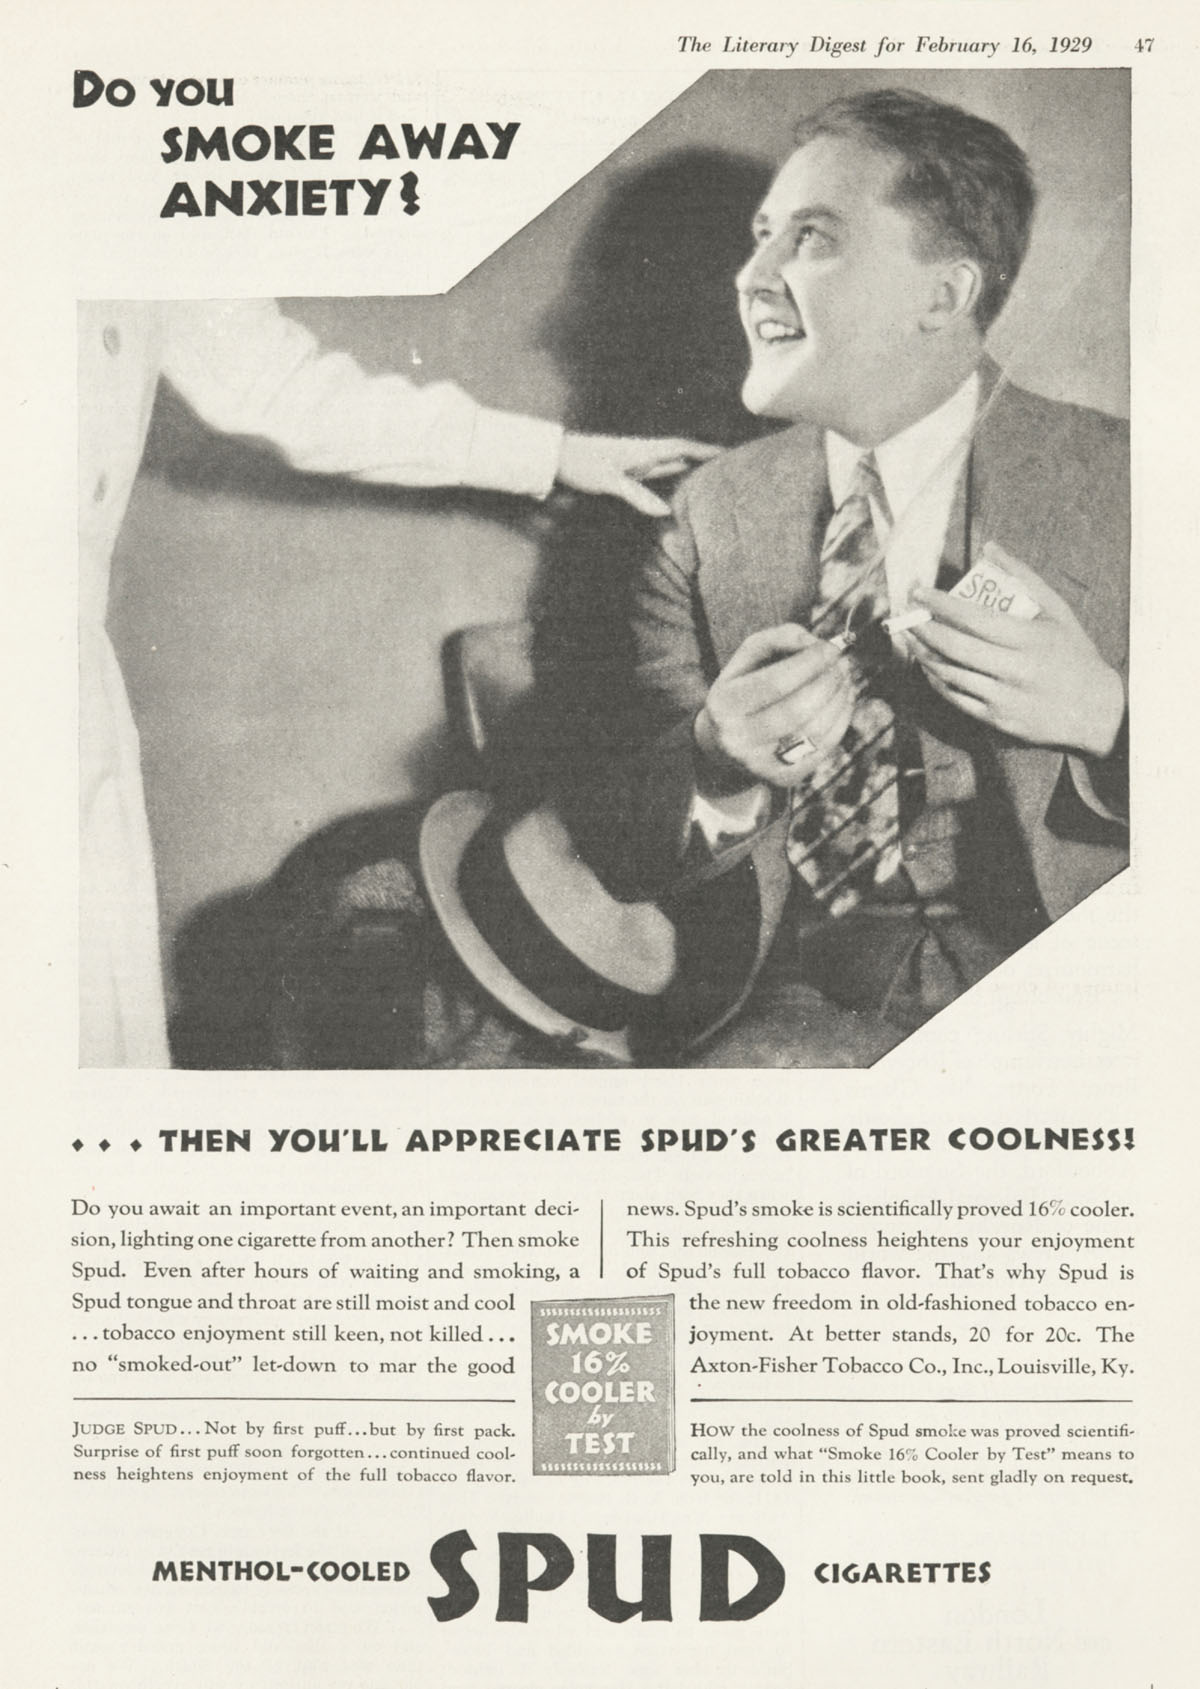 Cigarette advertisement from The Literary Digest on February 16, 1929, reading 